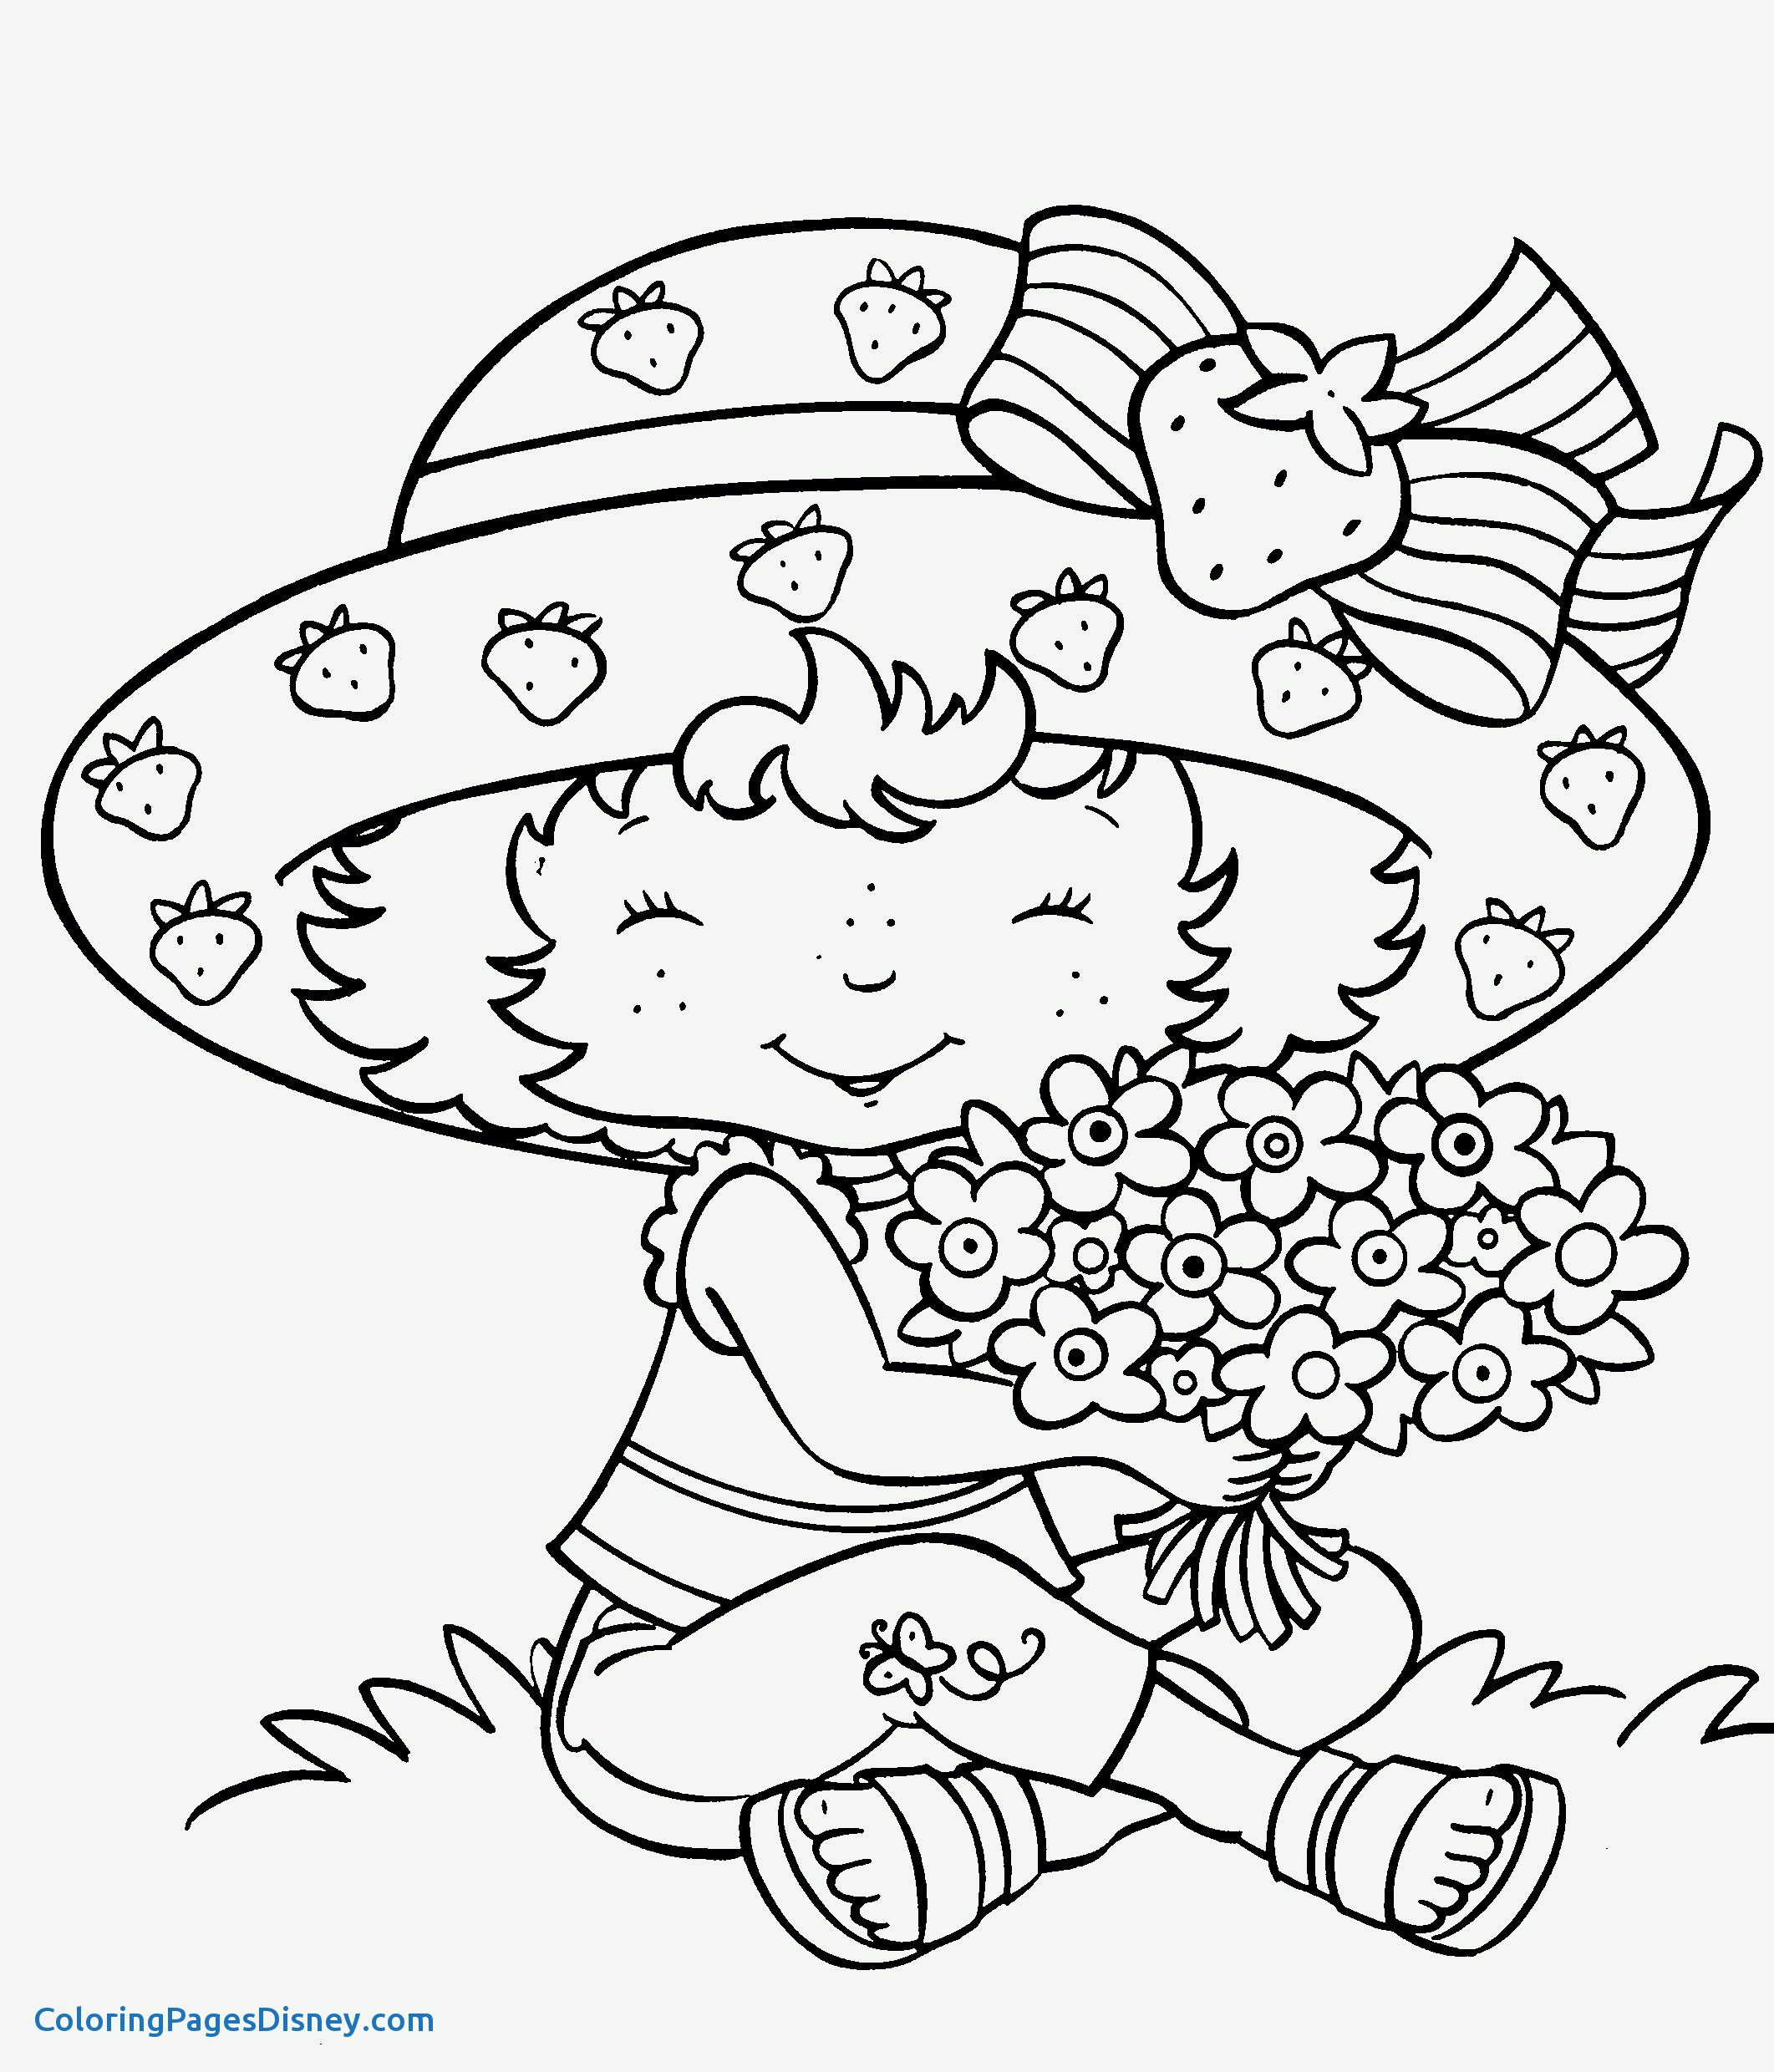 The Best Coloring Pages Ever at GetColorings.com | Free printable